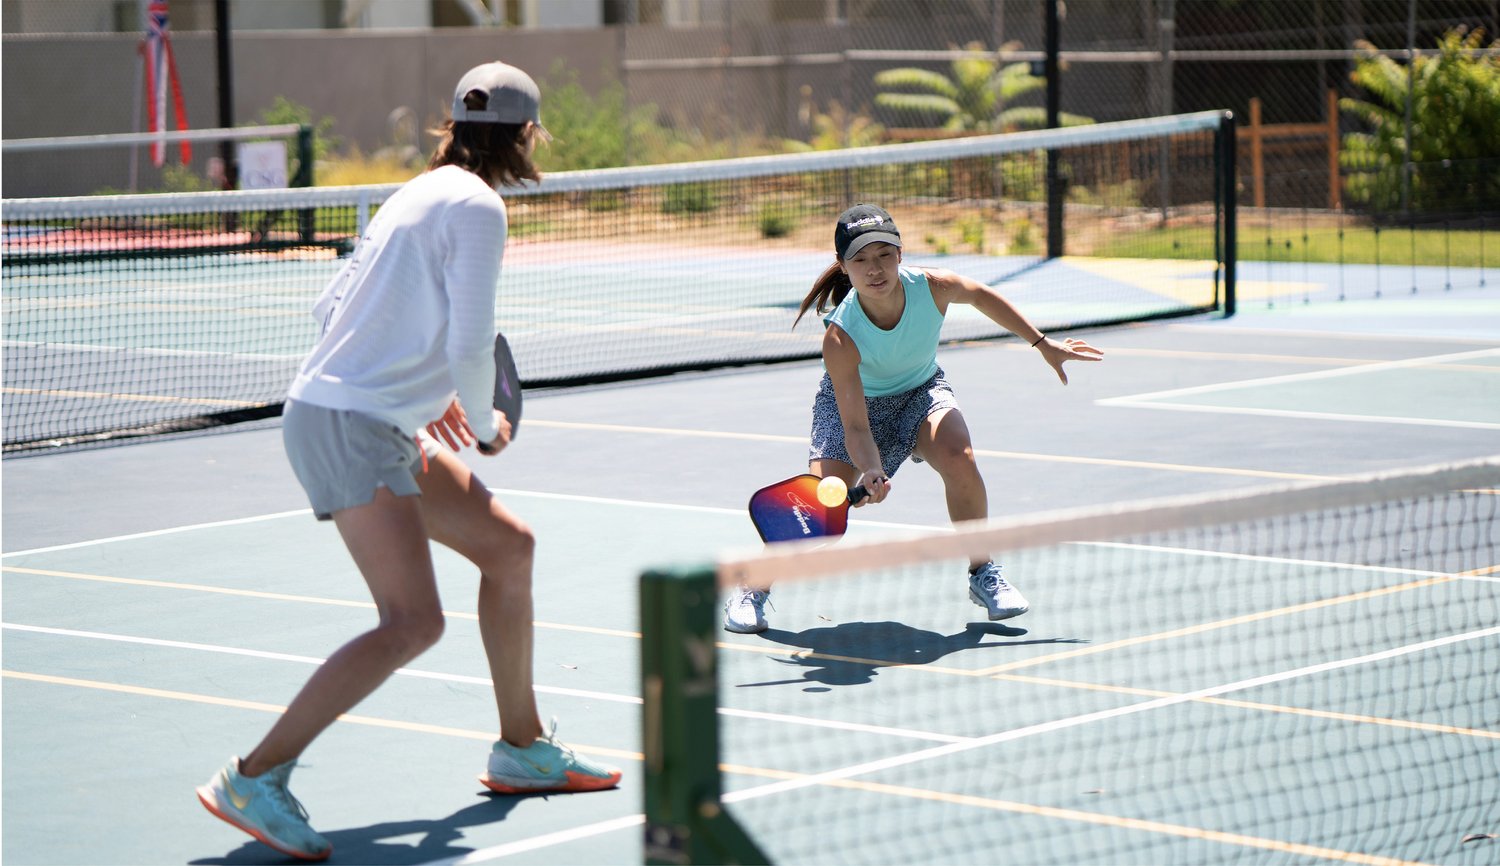 How to return a spin serve in pickleball